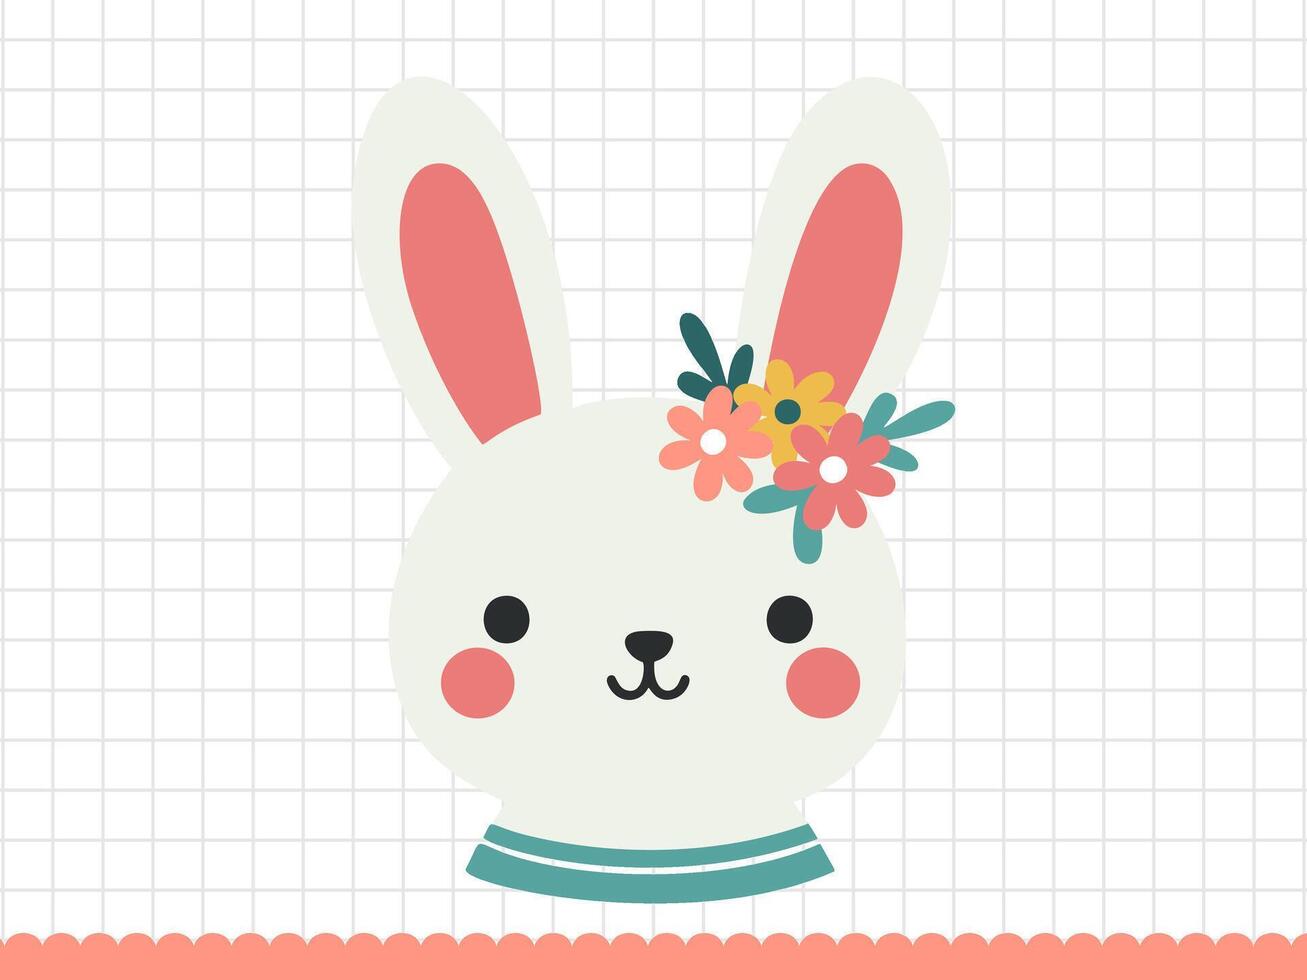 Rabbit face with flowers. Little bunny in cartoon style. illustration. vector